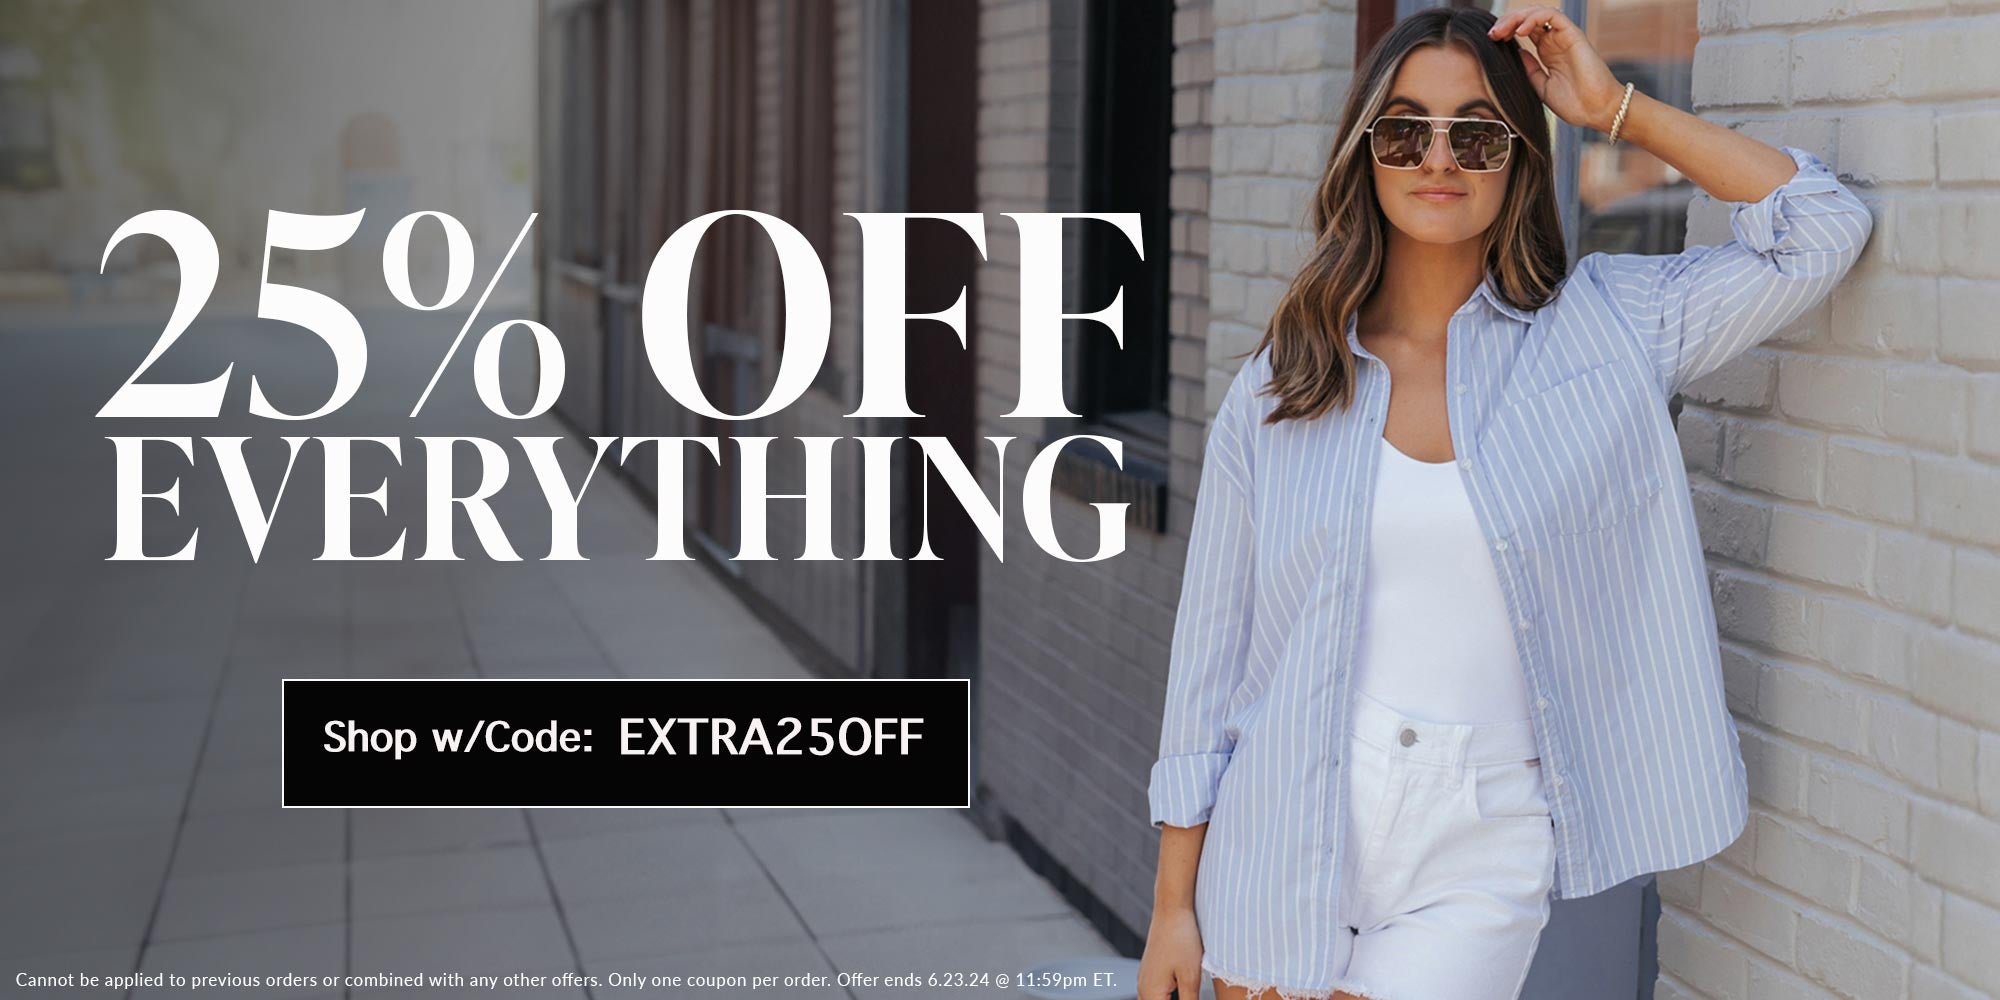 25% off everything shop w/code EXTRA25OFF Cannot be applied to previous orders or combined with any other offers. Only one coupon per order. Offer ends 6.23.24 @ 11:59pm ET.